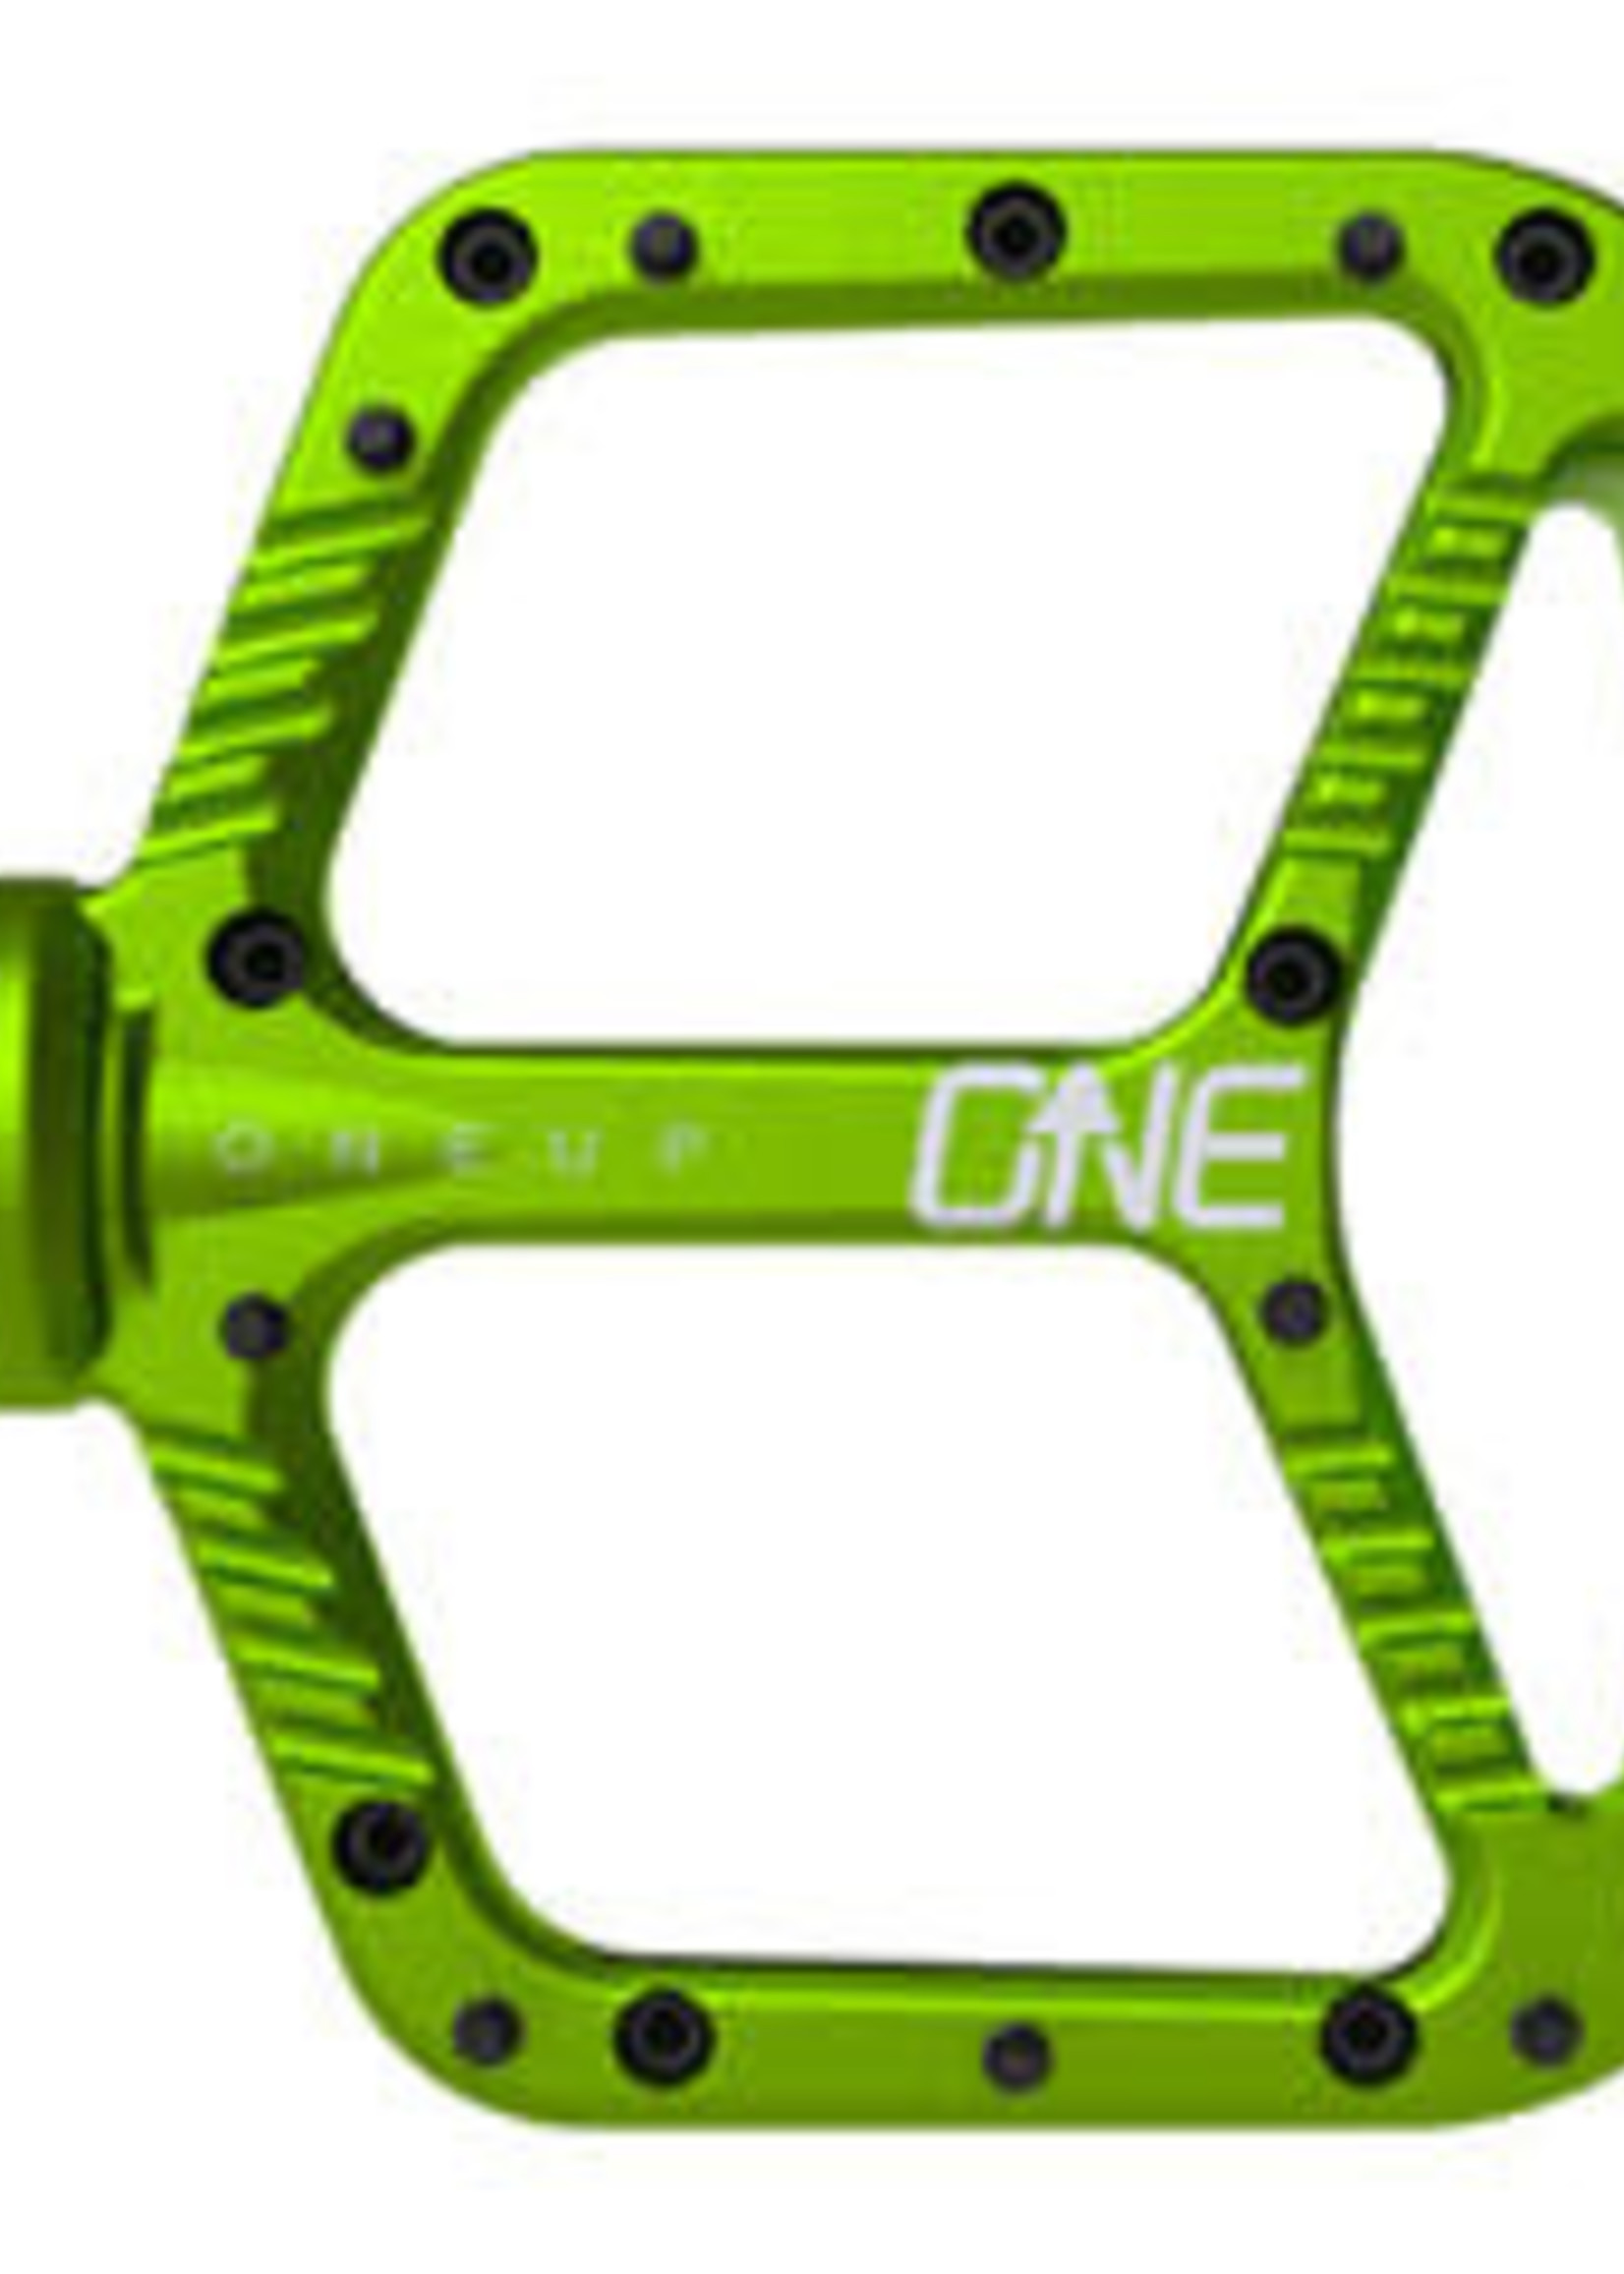 ONEUP Oneup Pedals Alu